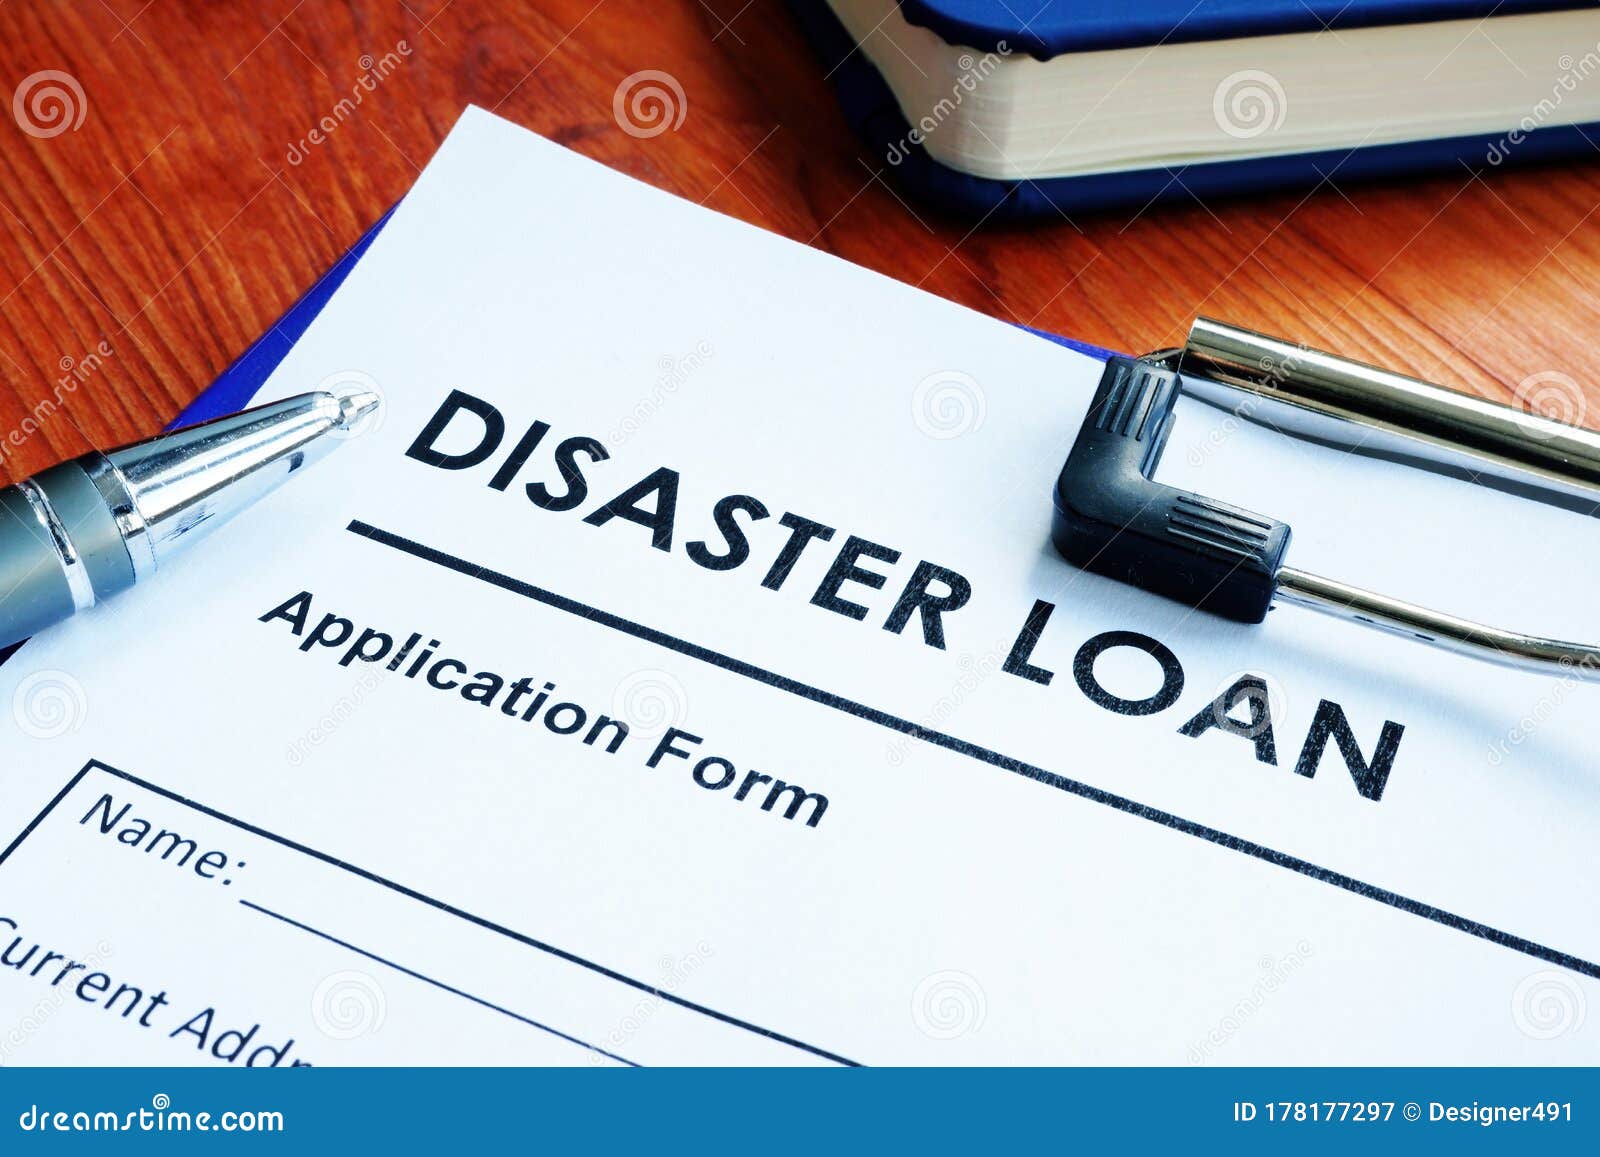 sba disaster loan application form on the surface